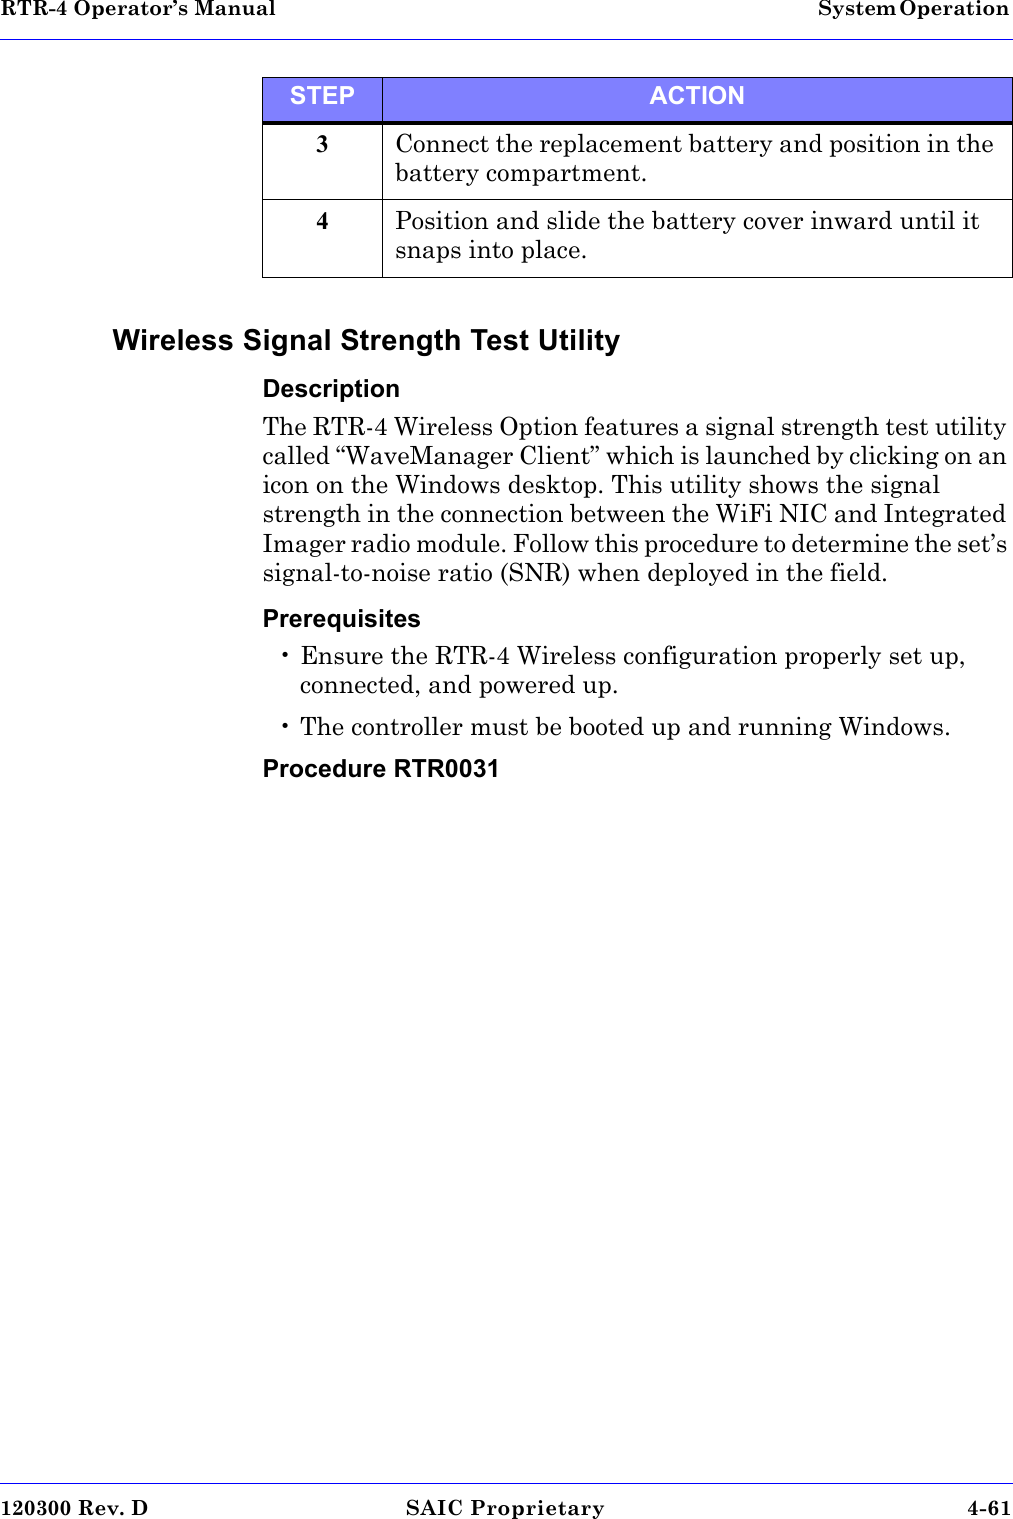 RTR-4 Operator’s Manual System Operation 120300 Rev. D SAIC Proprietary 4-61 Wireless Signal Strength Test UtilityDescriptionThe RTR-4 Wireless Option features a signal strength test utility called “WaveManager Client” which is launched by clicking on an icon on the Windows desktop. This utility shows the signal strength in the connection between the WiFi NIC and Integrated Imager radio module. Follow this procedure to determine the set’s signal-to-noise ratio (SNR) when deployed in the field. Prerequisites• Ensure the RTR-4 Wireless configuration properly set up, connected, and powered up.• The controller must be booted up and running Windows.Procedure RTR00313Connect the replacement battery and position in the battery compartment. 4Position and slide the battery cover inward until it snaps into place. STEP ACTION